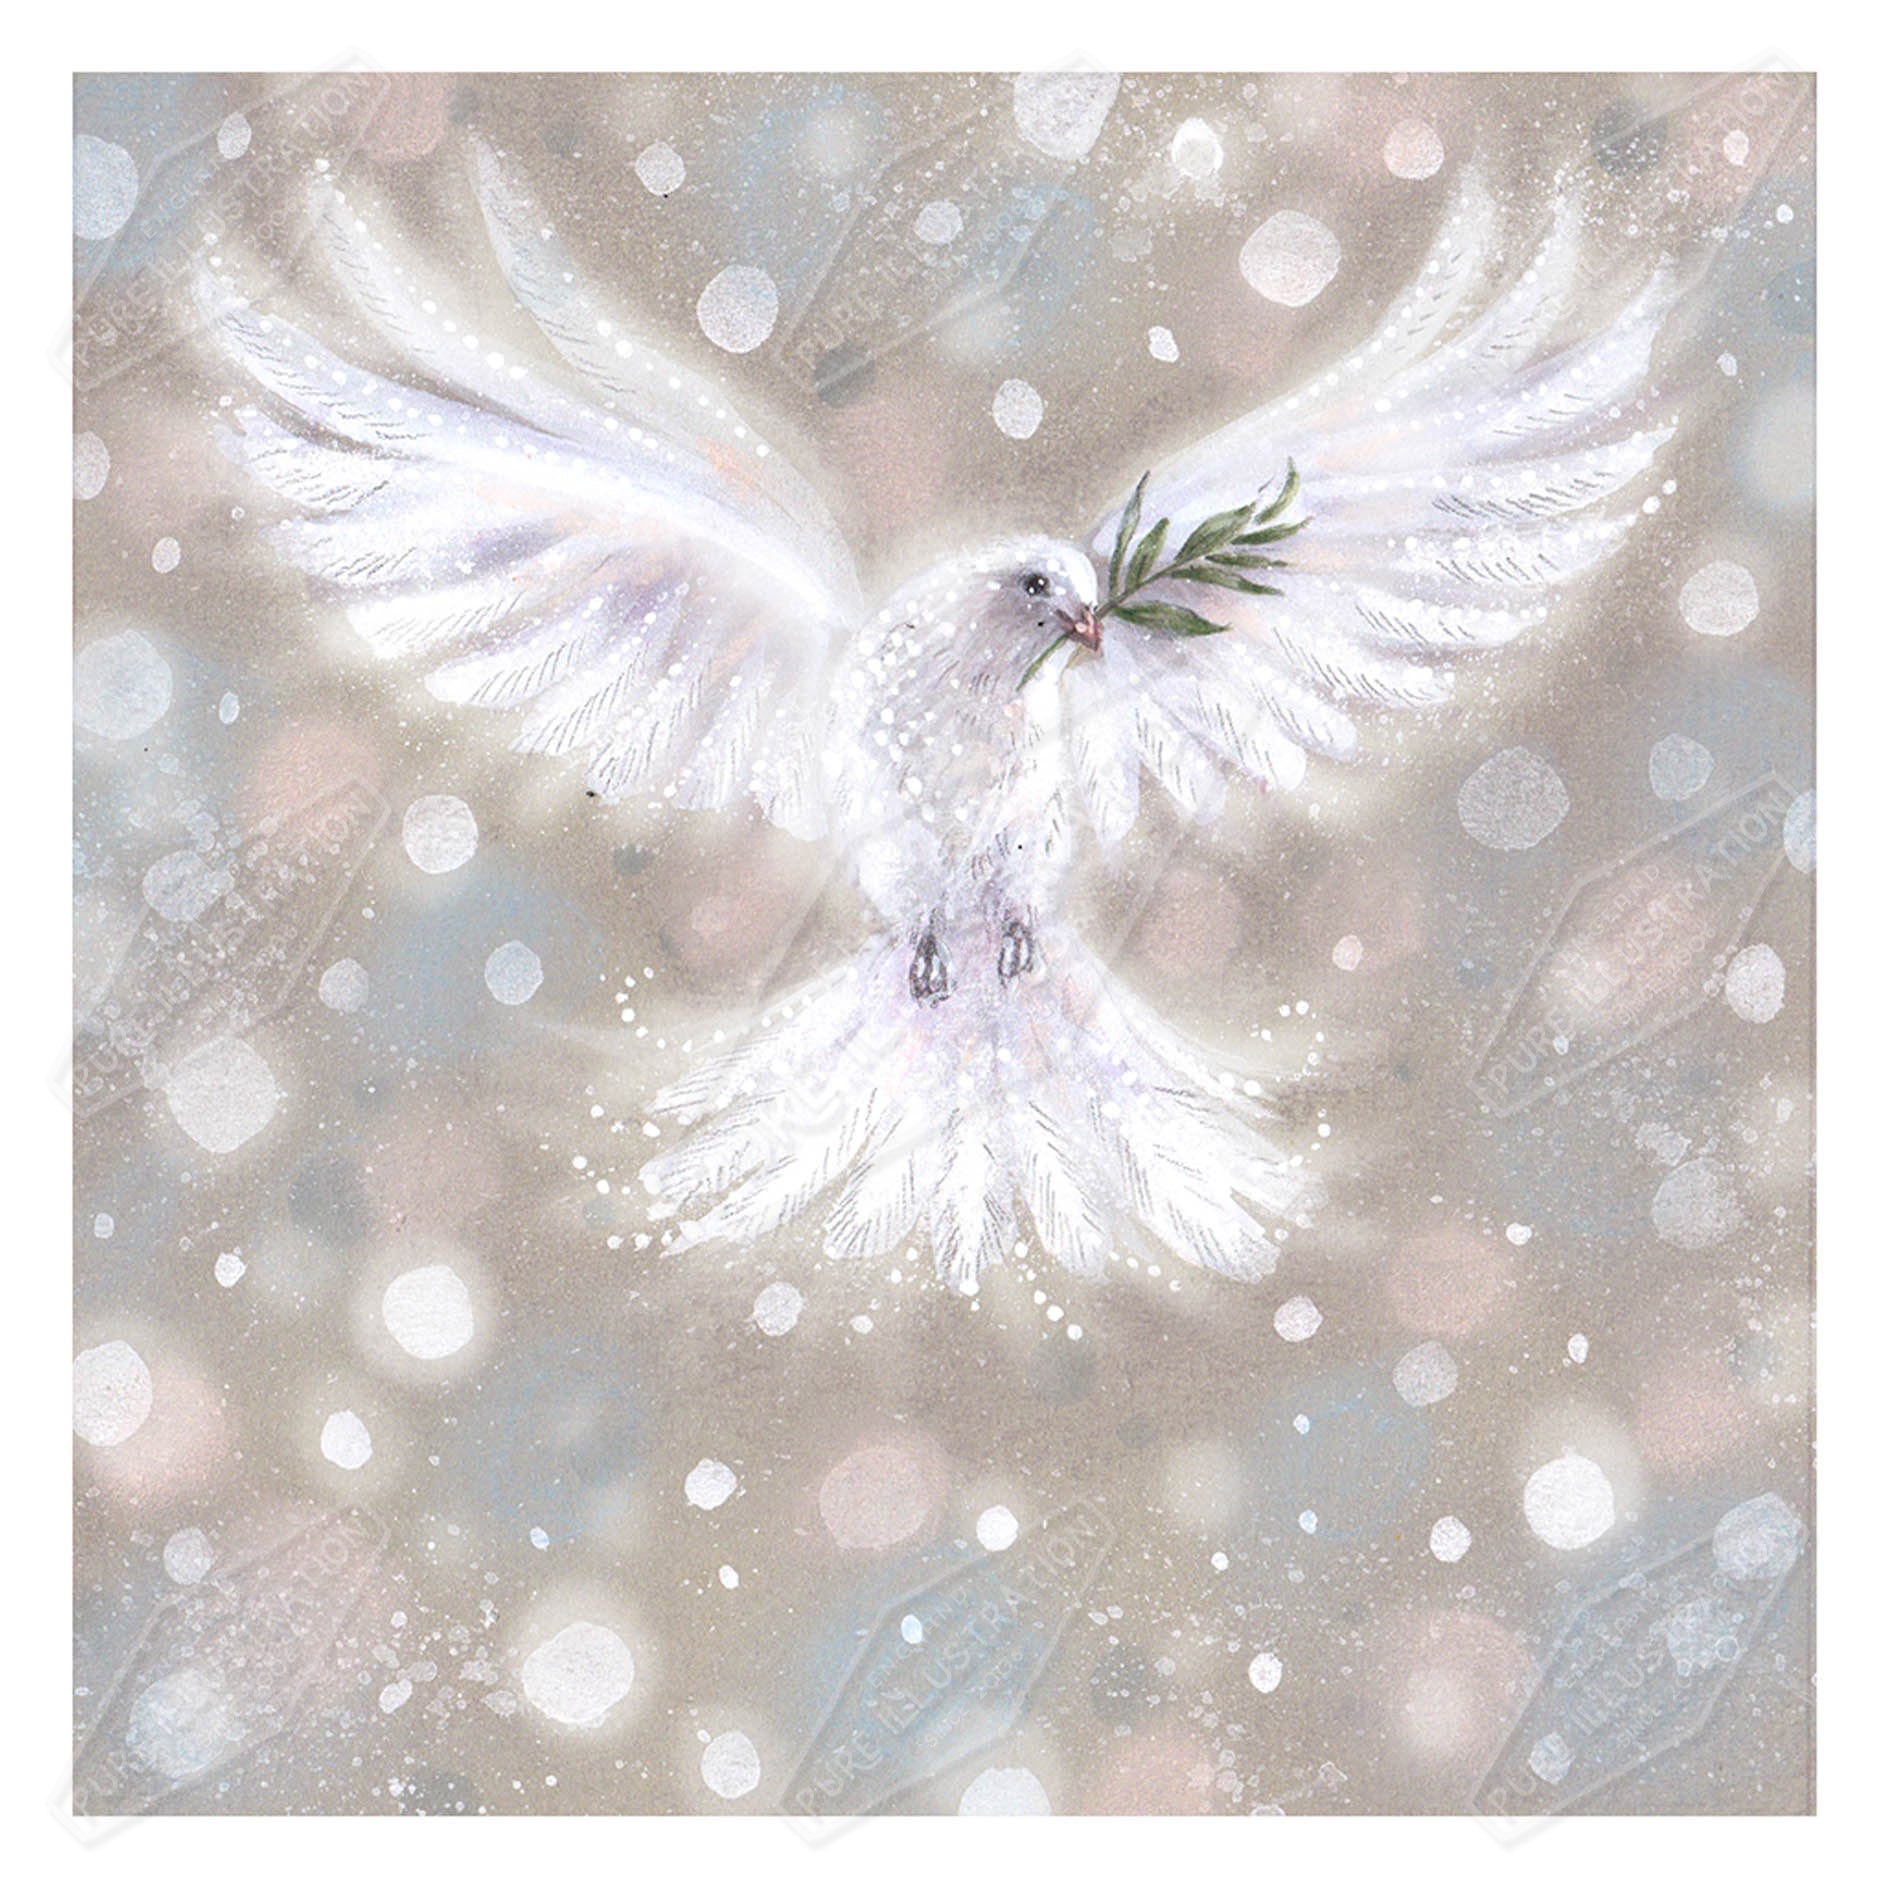 00035699AMA - Ally Marie is represented by Pure Art Licensing Agency - Christmas Greeting Card Design